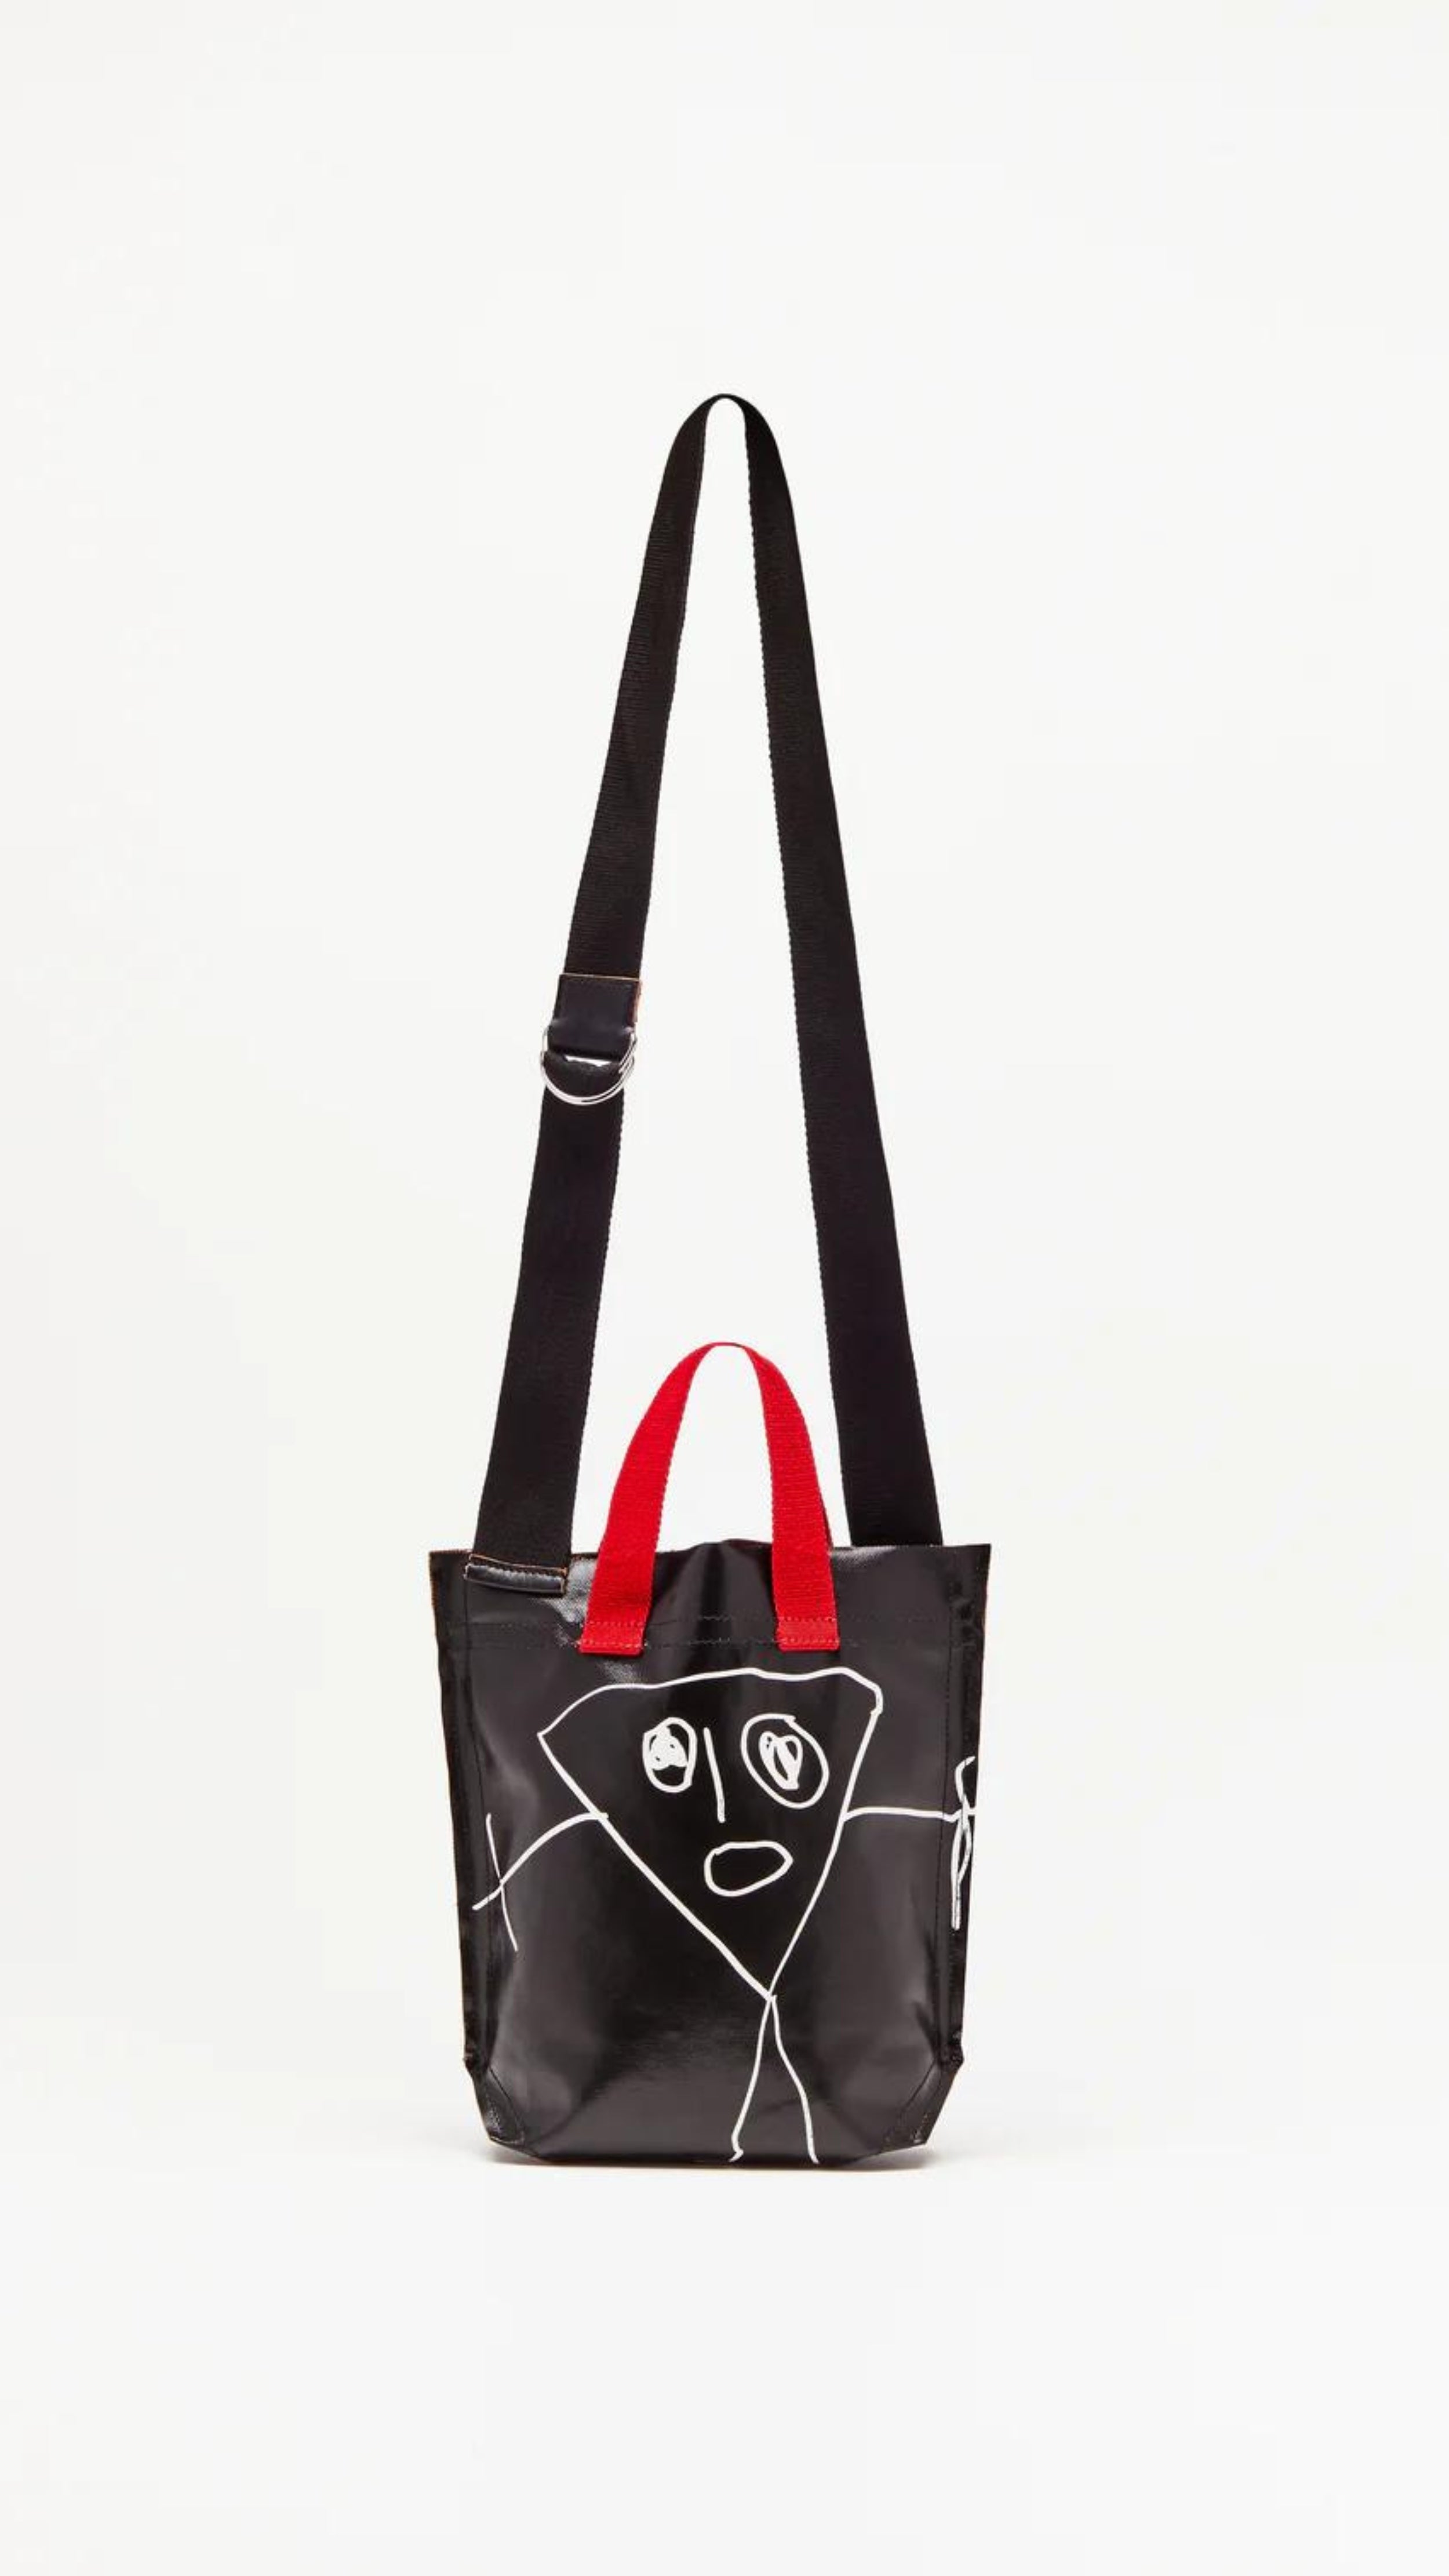 Plan C Pili and Bianca Black Mini Shopper. Coated canvas mini shopper style bag with whimsical drawings on either side. Completed with a red handle strap and a long black strap. Shown from back view.